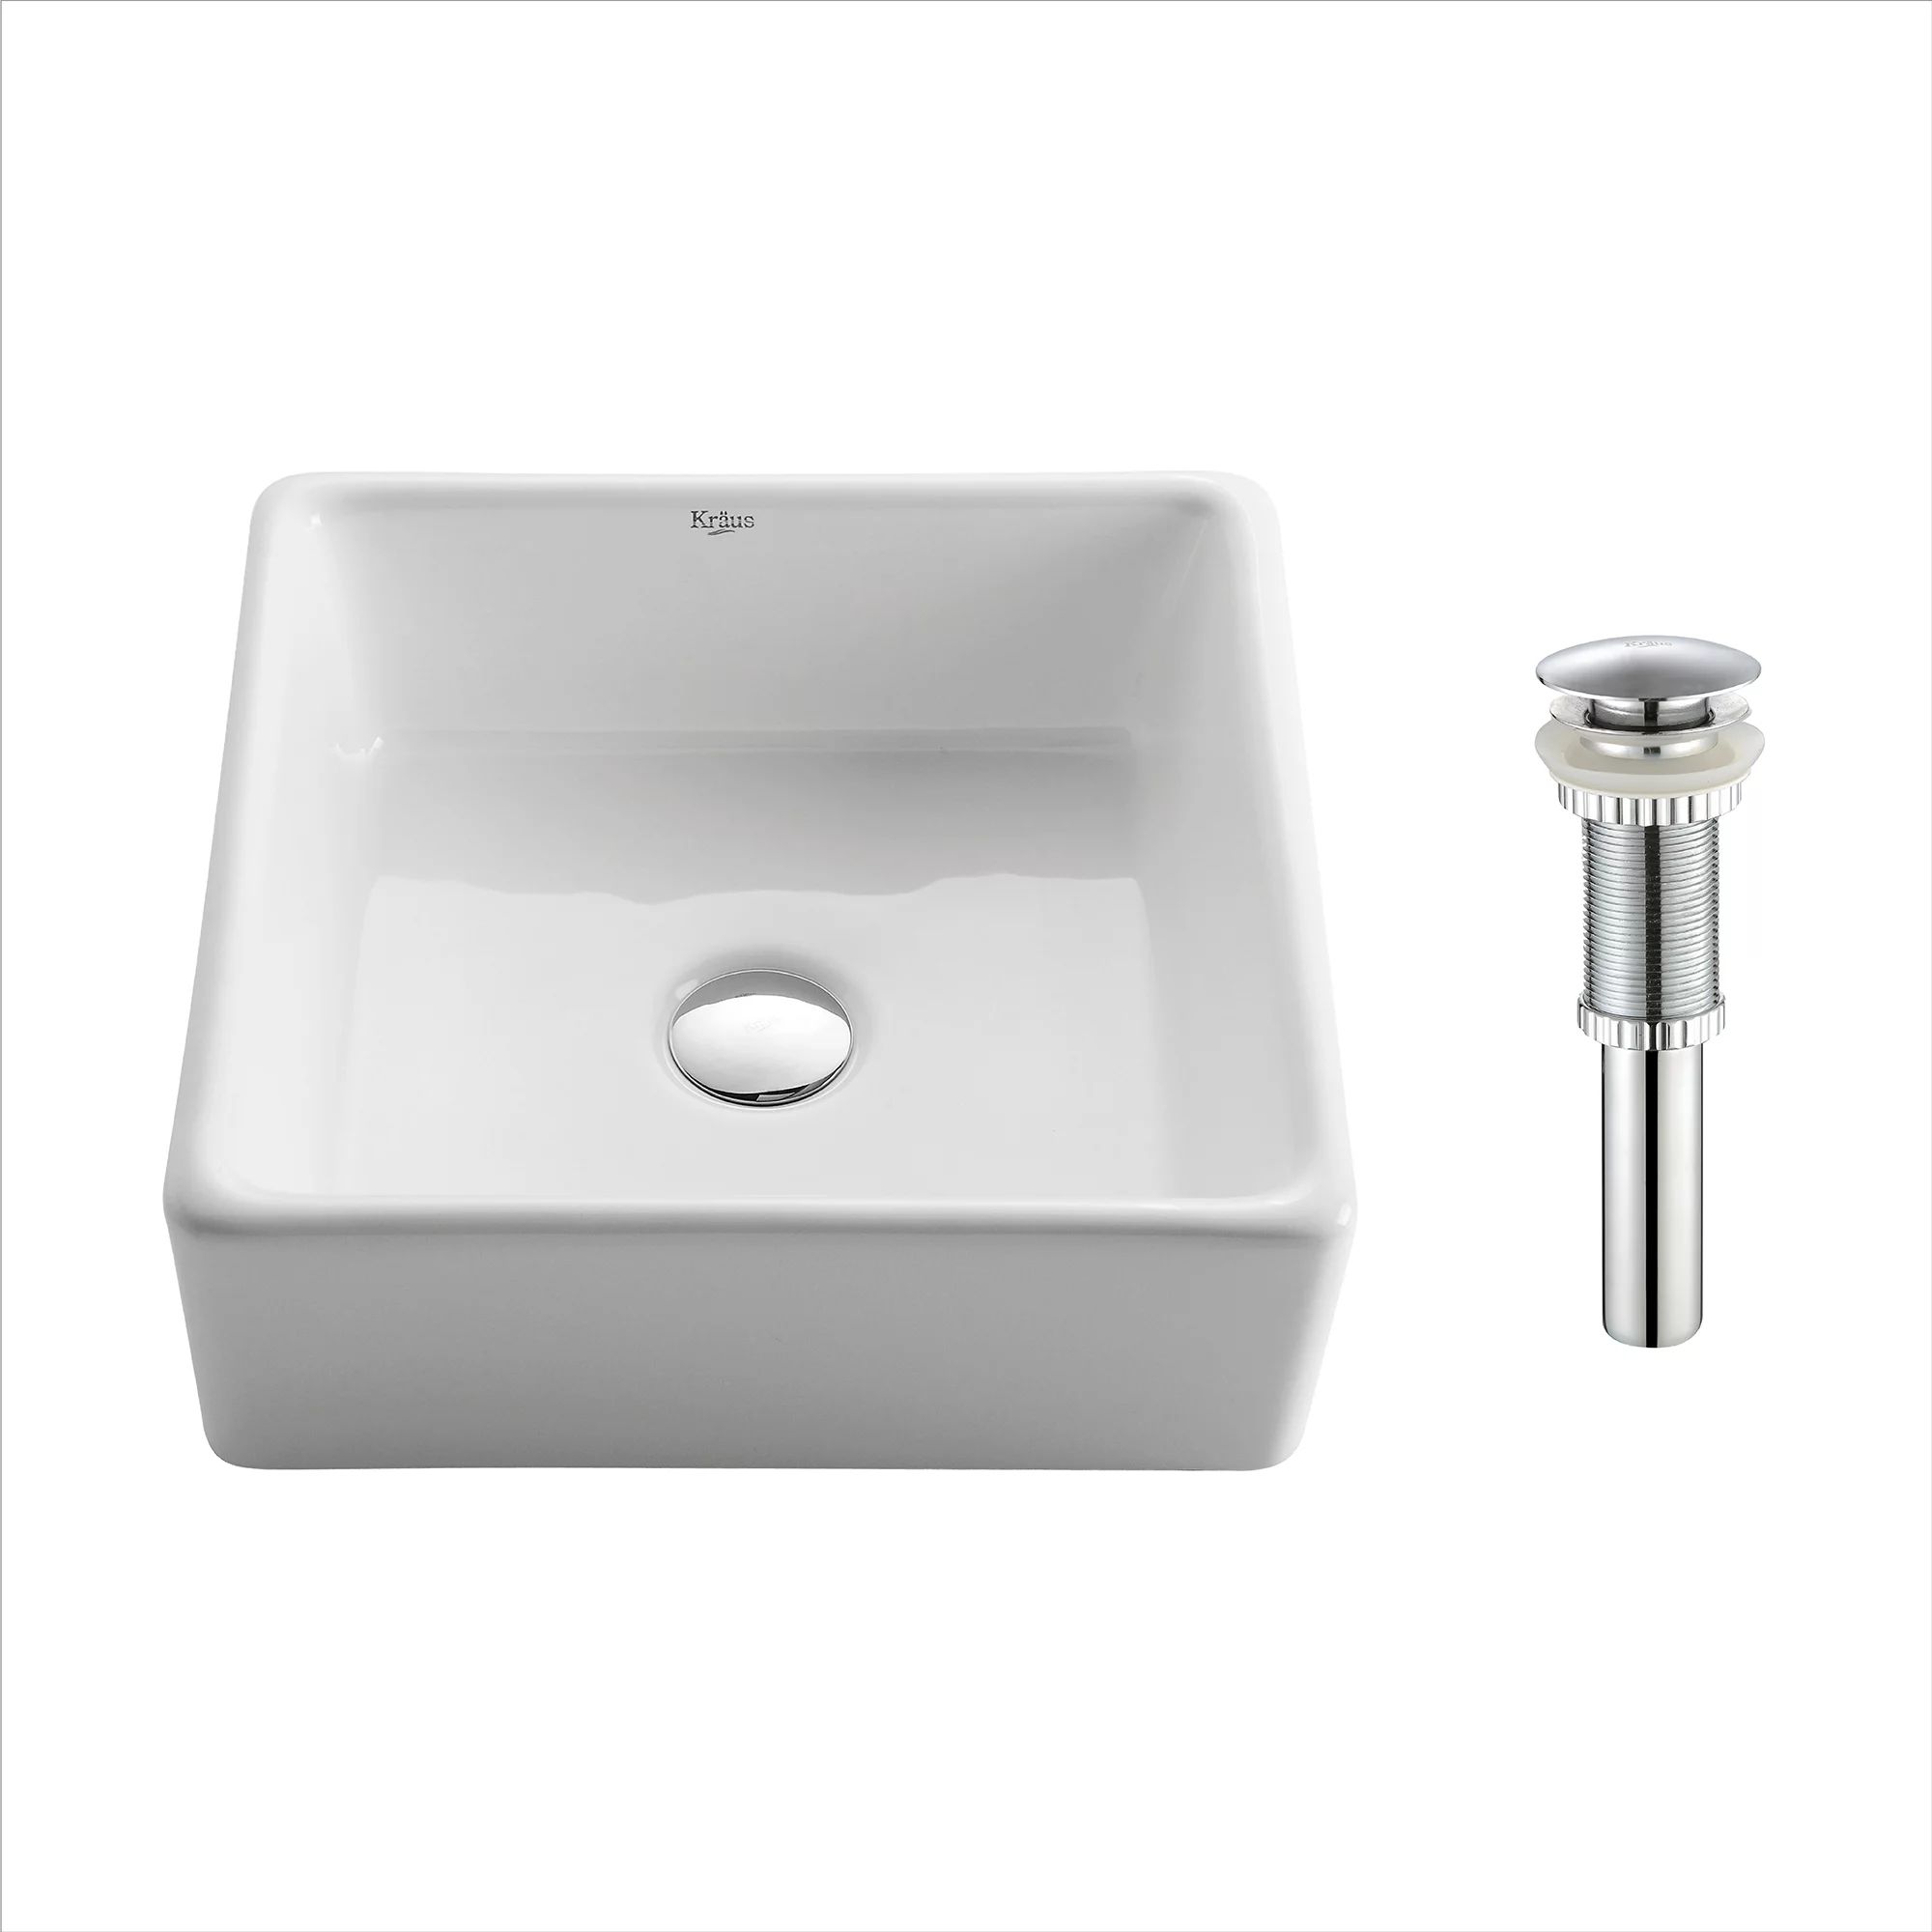 KRAUS Square Ceramic Vessel Bathroom Sink in White with Pop-Up Drain in Chrome | Walmart (US)